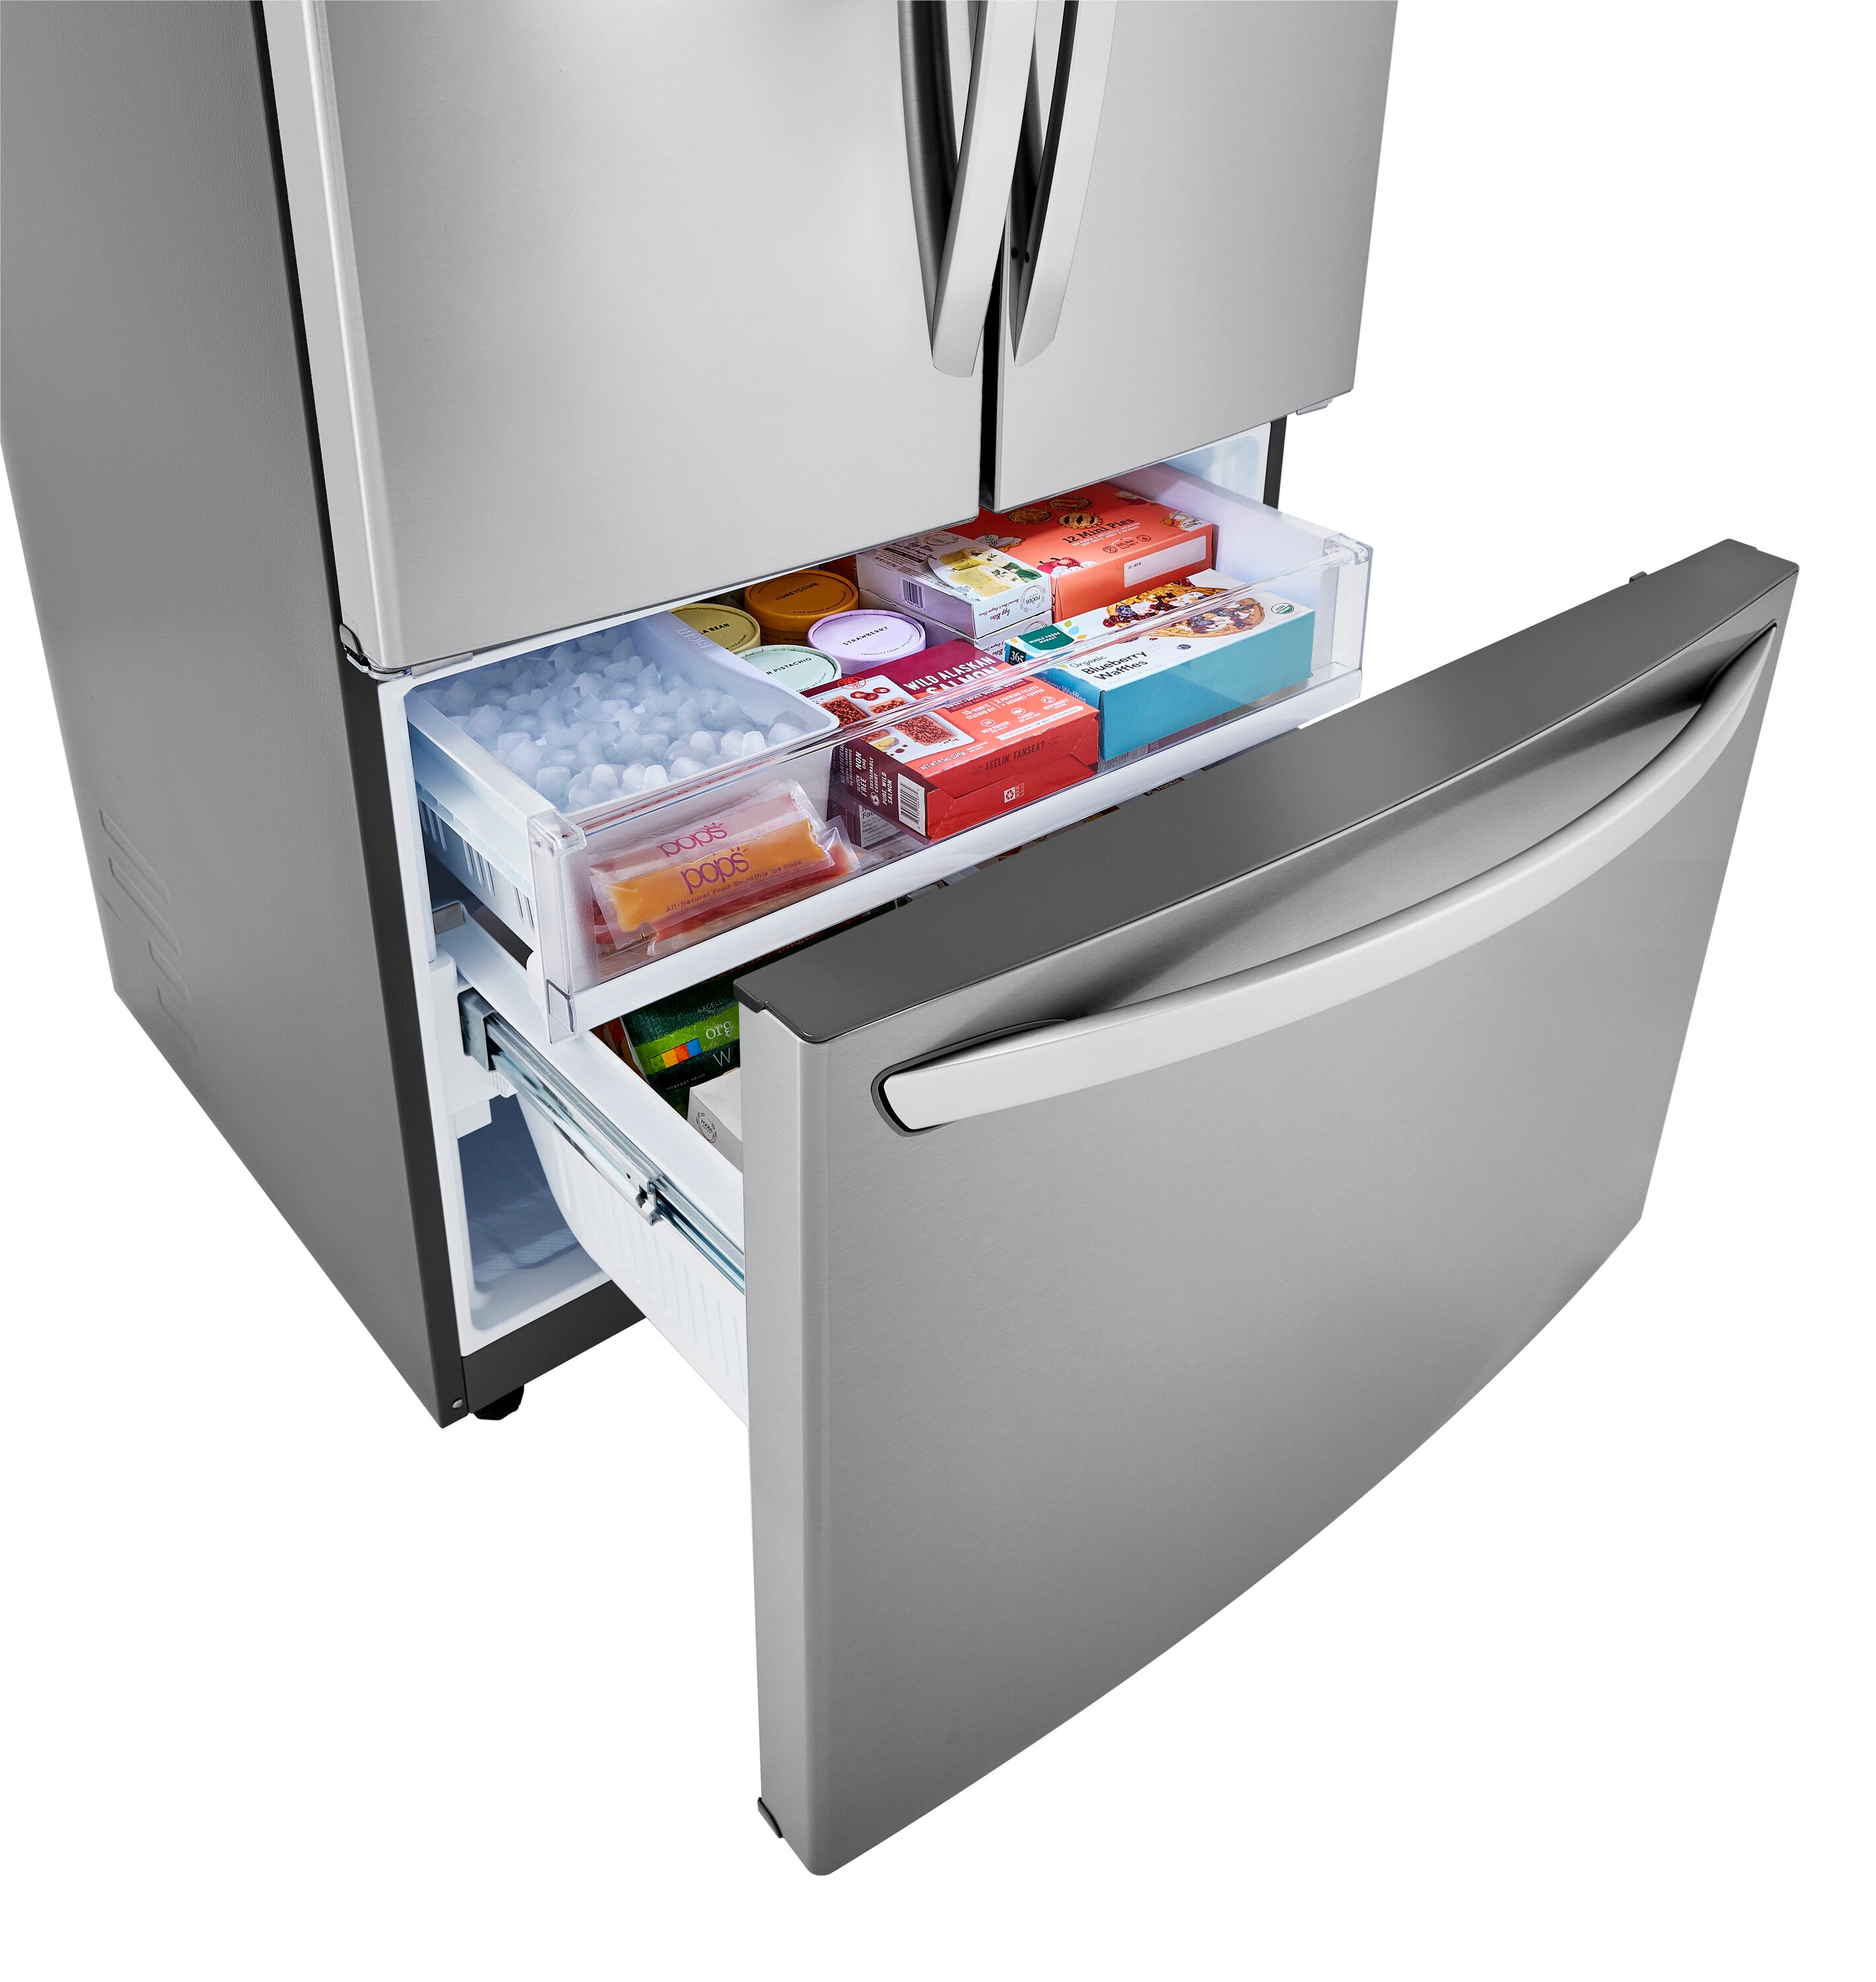 LG 36-inch, 29.7 cu.ft. Freestanding French 4-Door Refrigerator with I